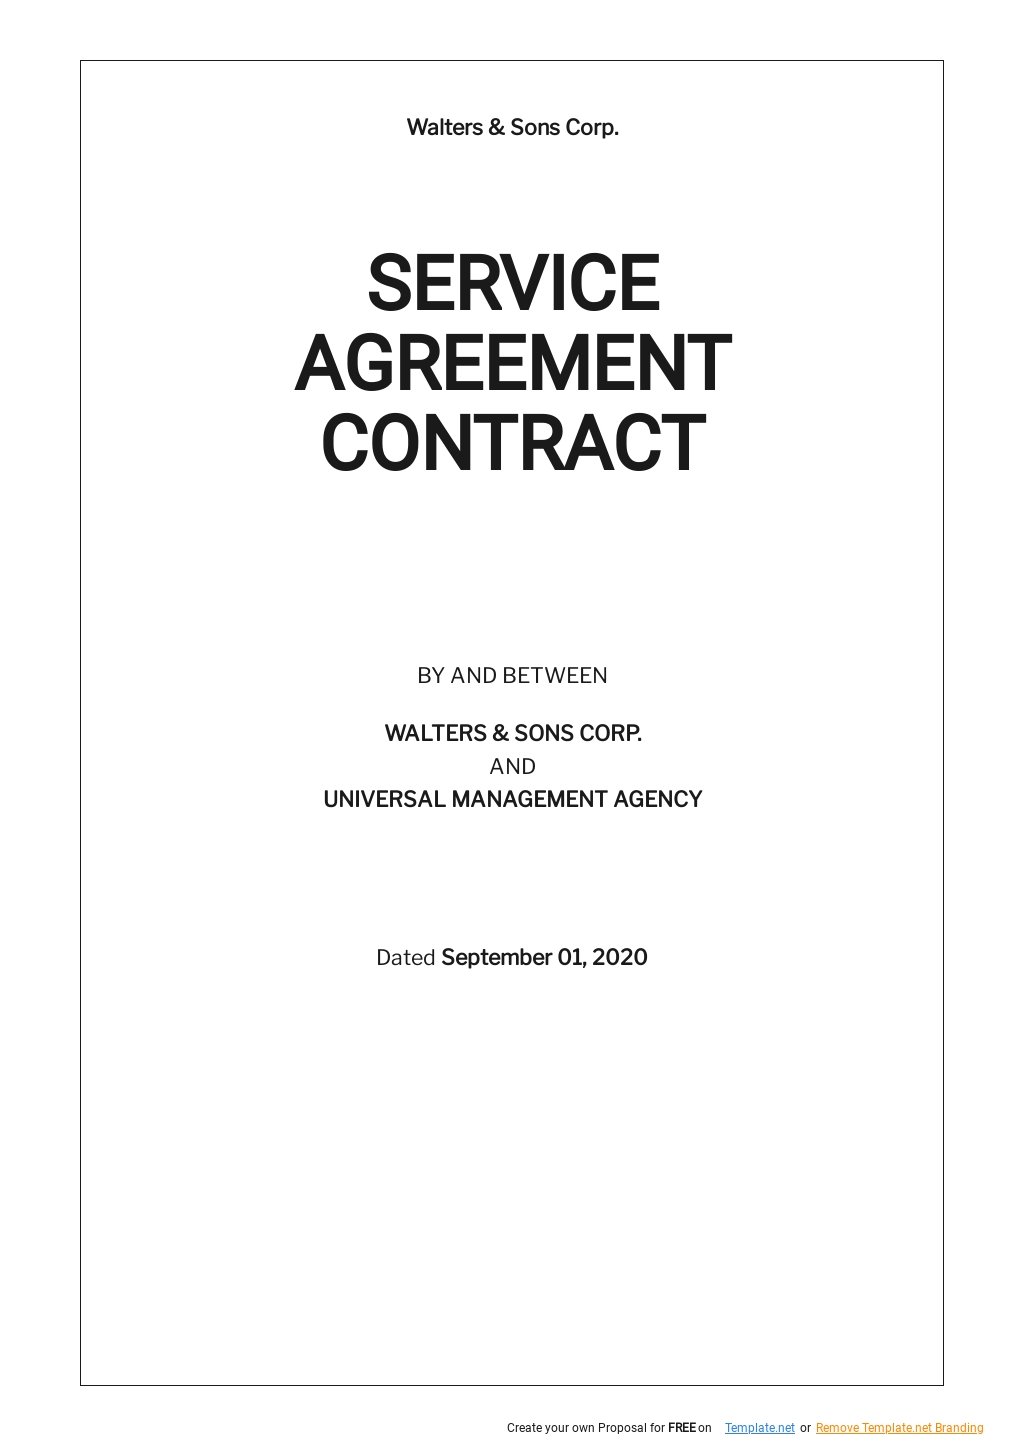 Free Contract Agreement Template Word